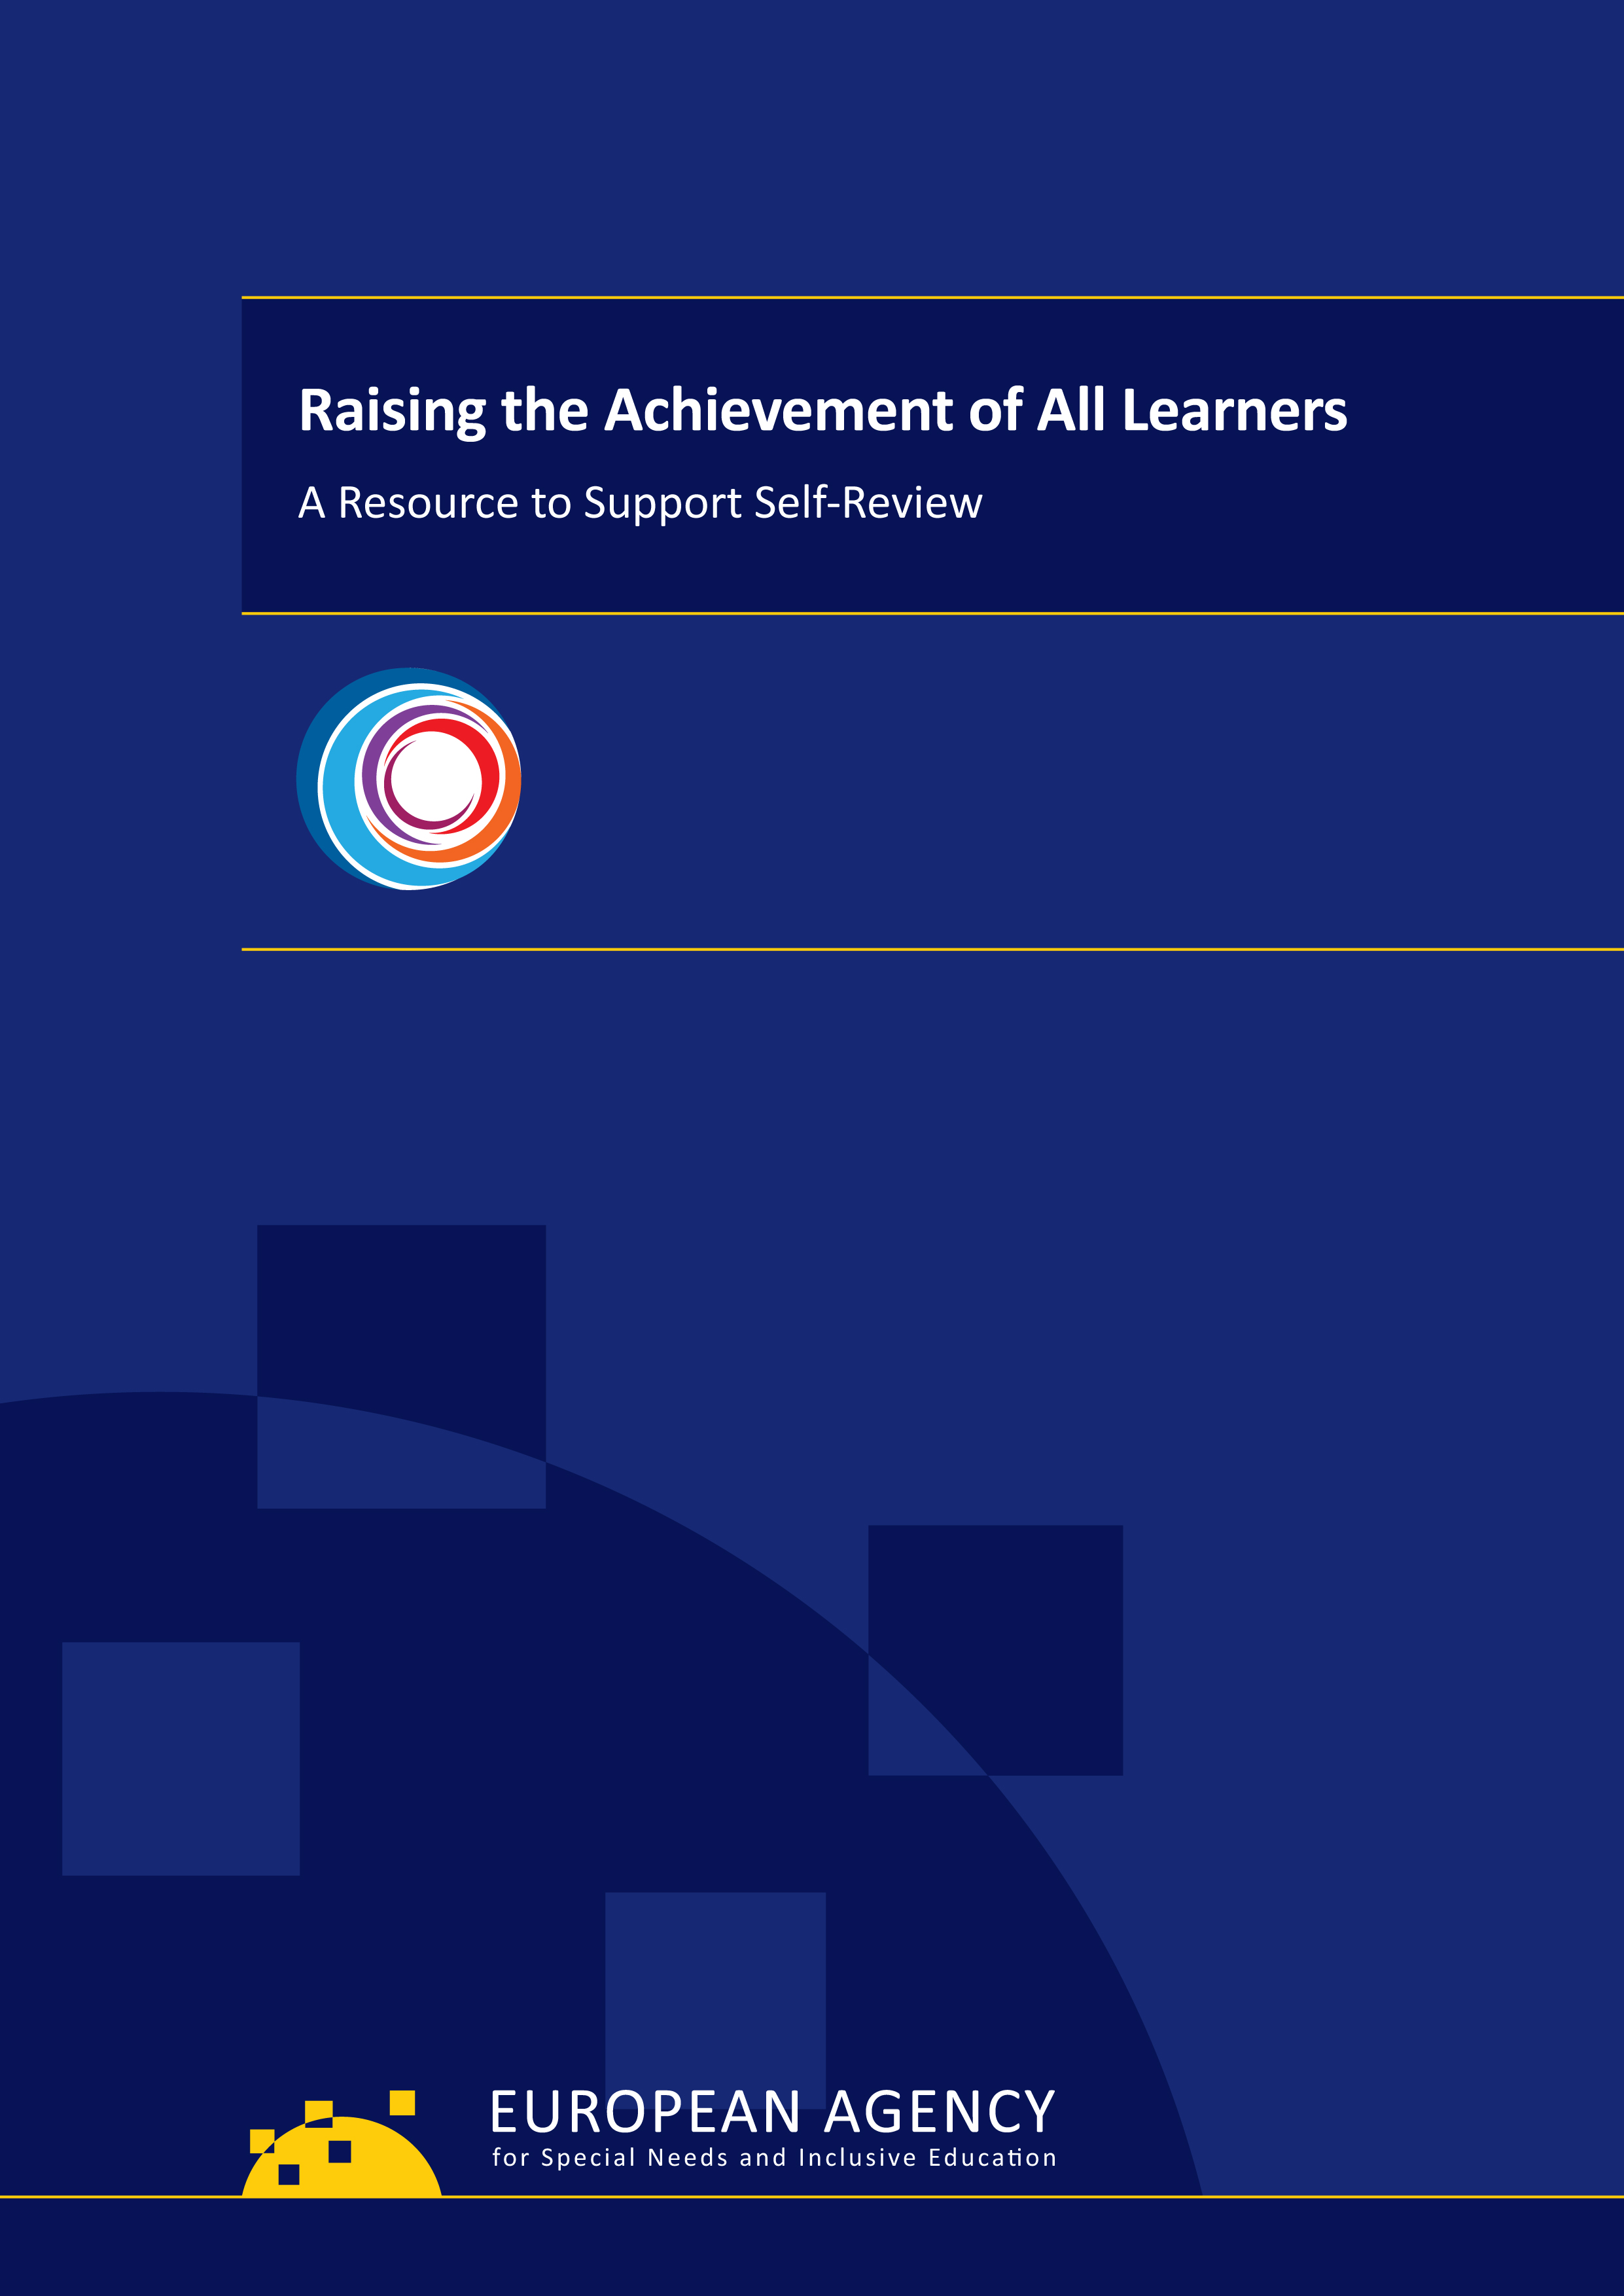 Raising the Achievement of All Learners: A Resource to Support Self-Review